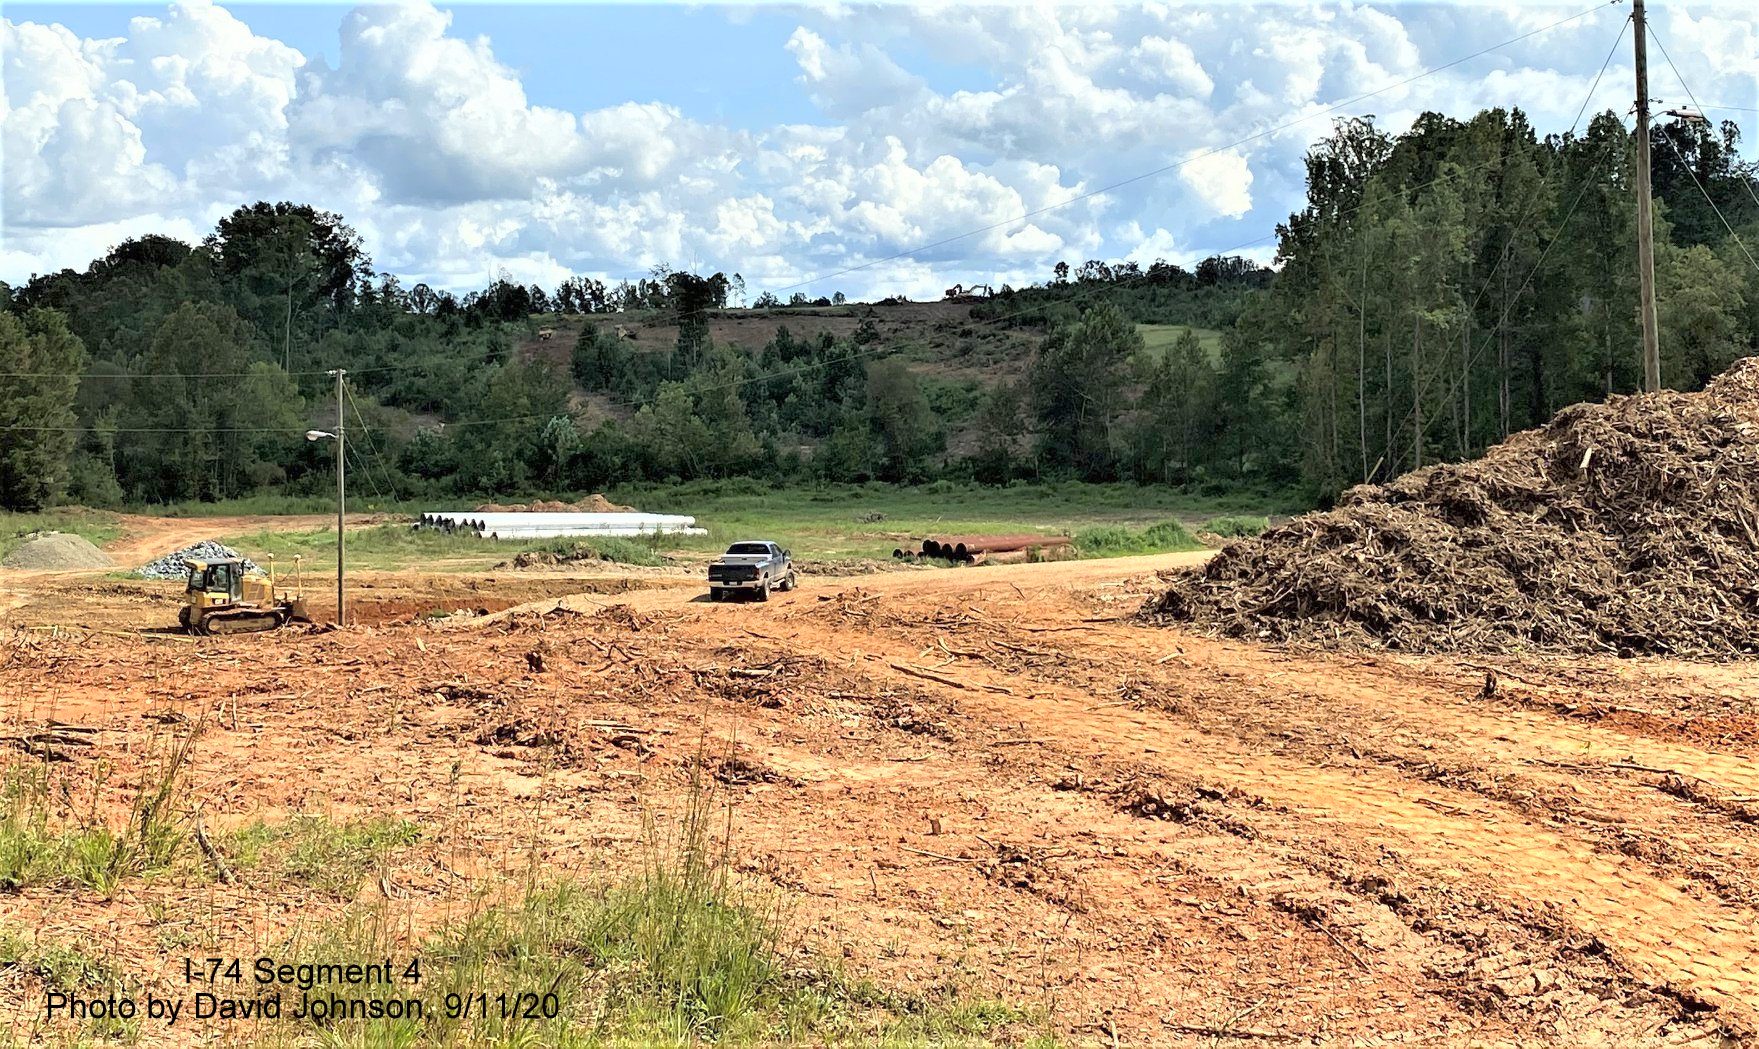 Image looking east at Phelps Drive at future bridge for I-74 Winston Salem Northern 
        Beltway, by David Johnson September 2020